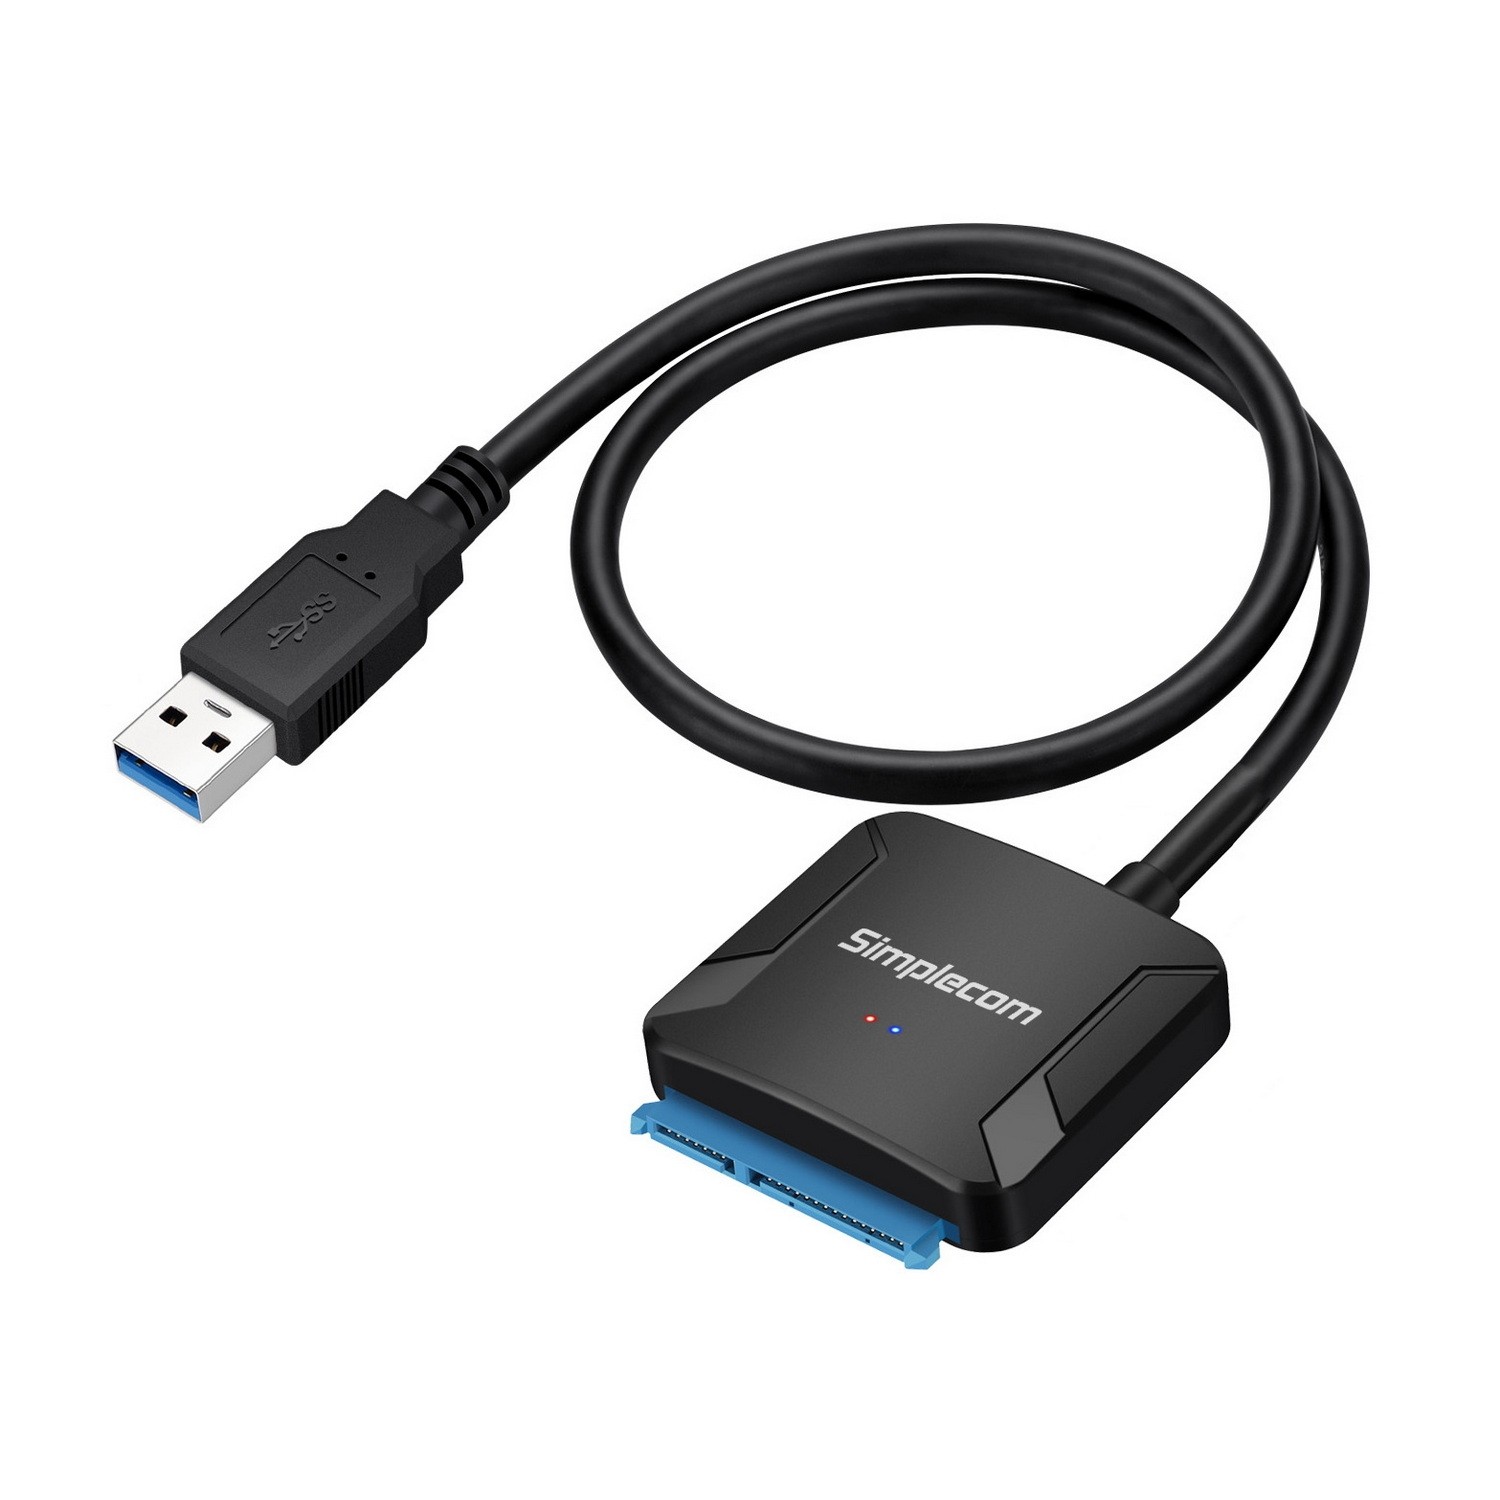 Simplecom SA236 USB 3.0 to Adapter Cable Converter with Power Supply for & 3.5" HDD SSD